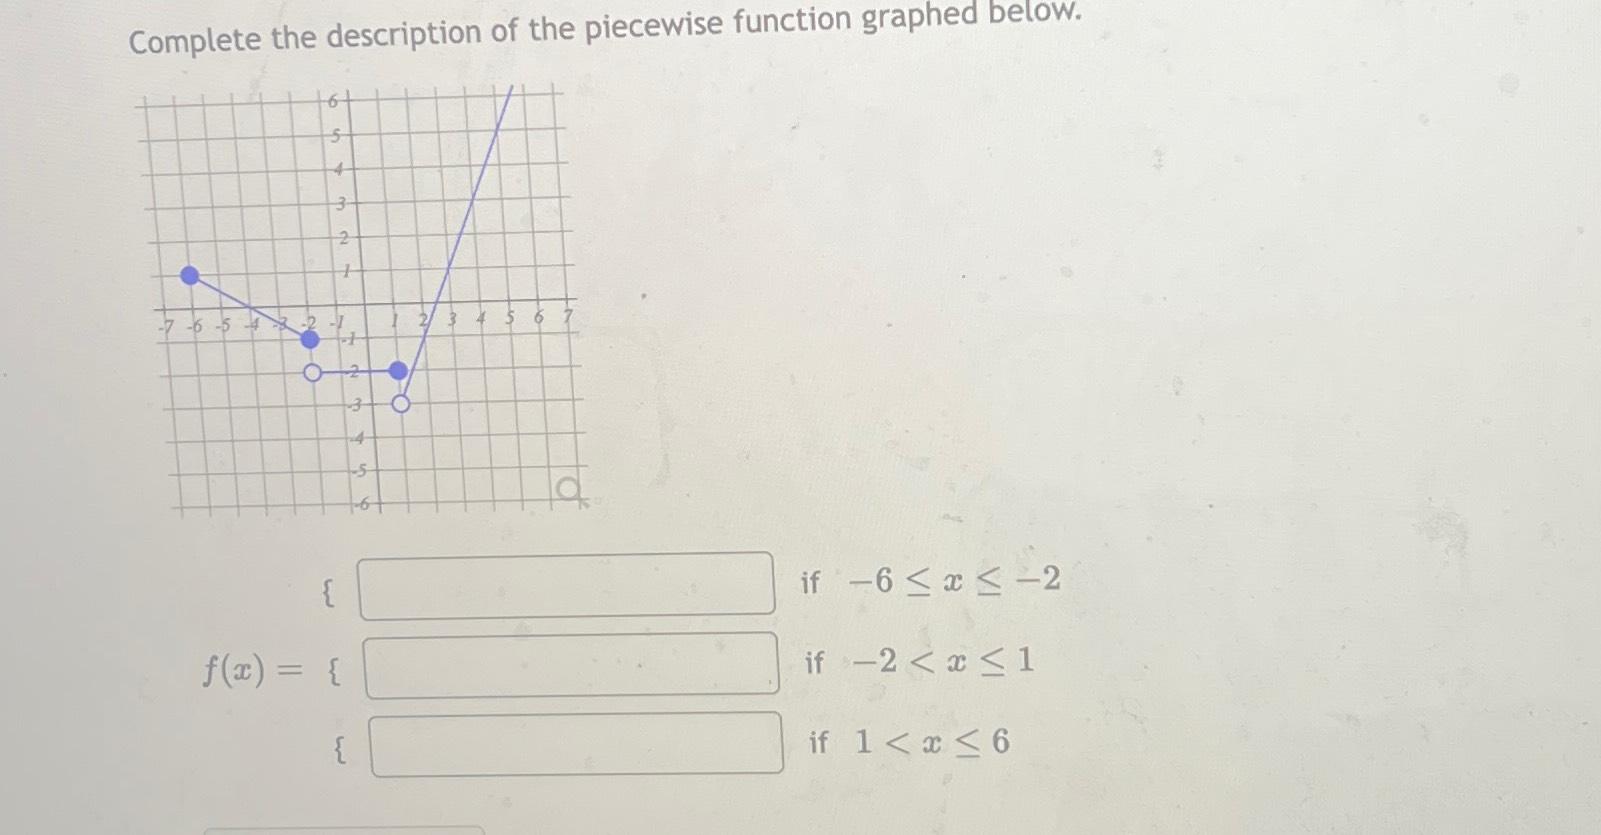 Solved Complete the description of the piecewise function | Chegg.com